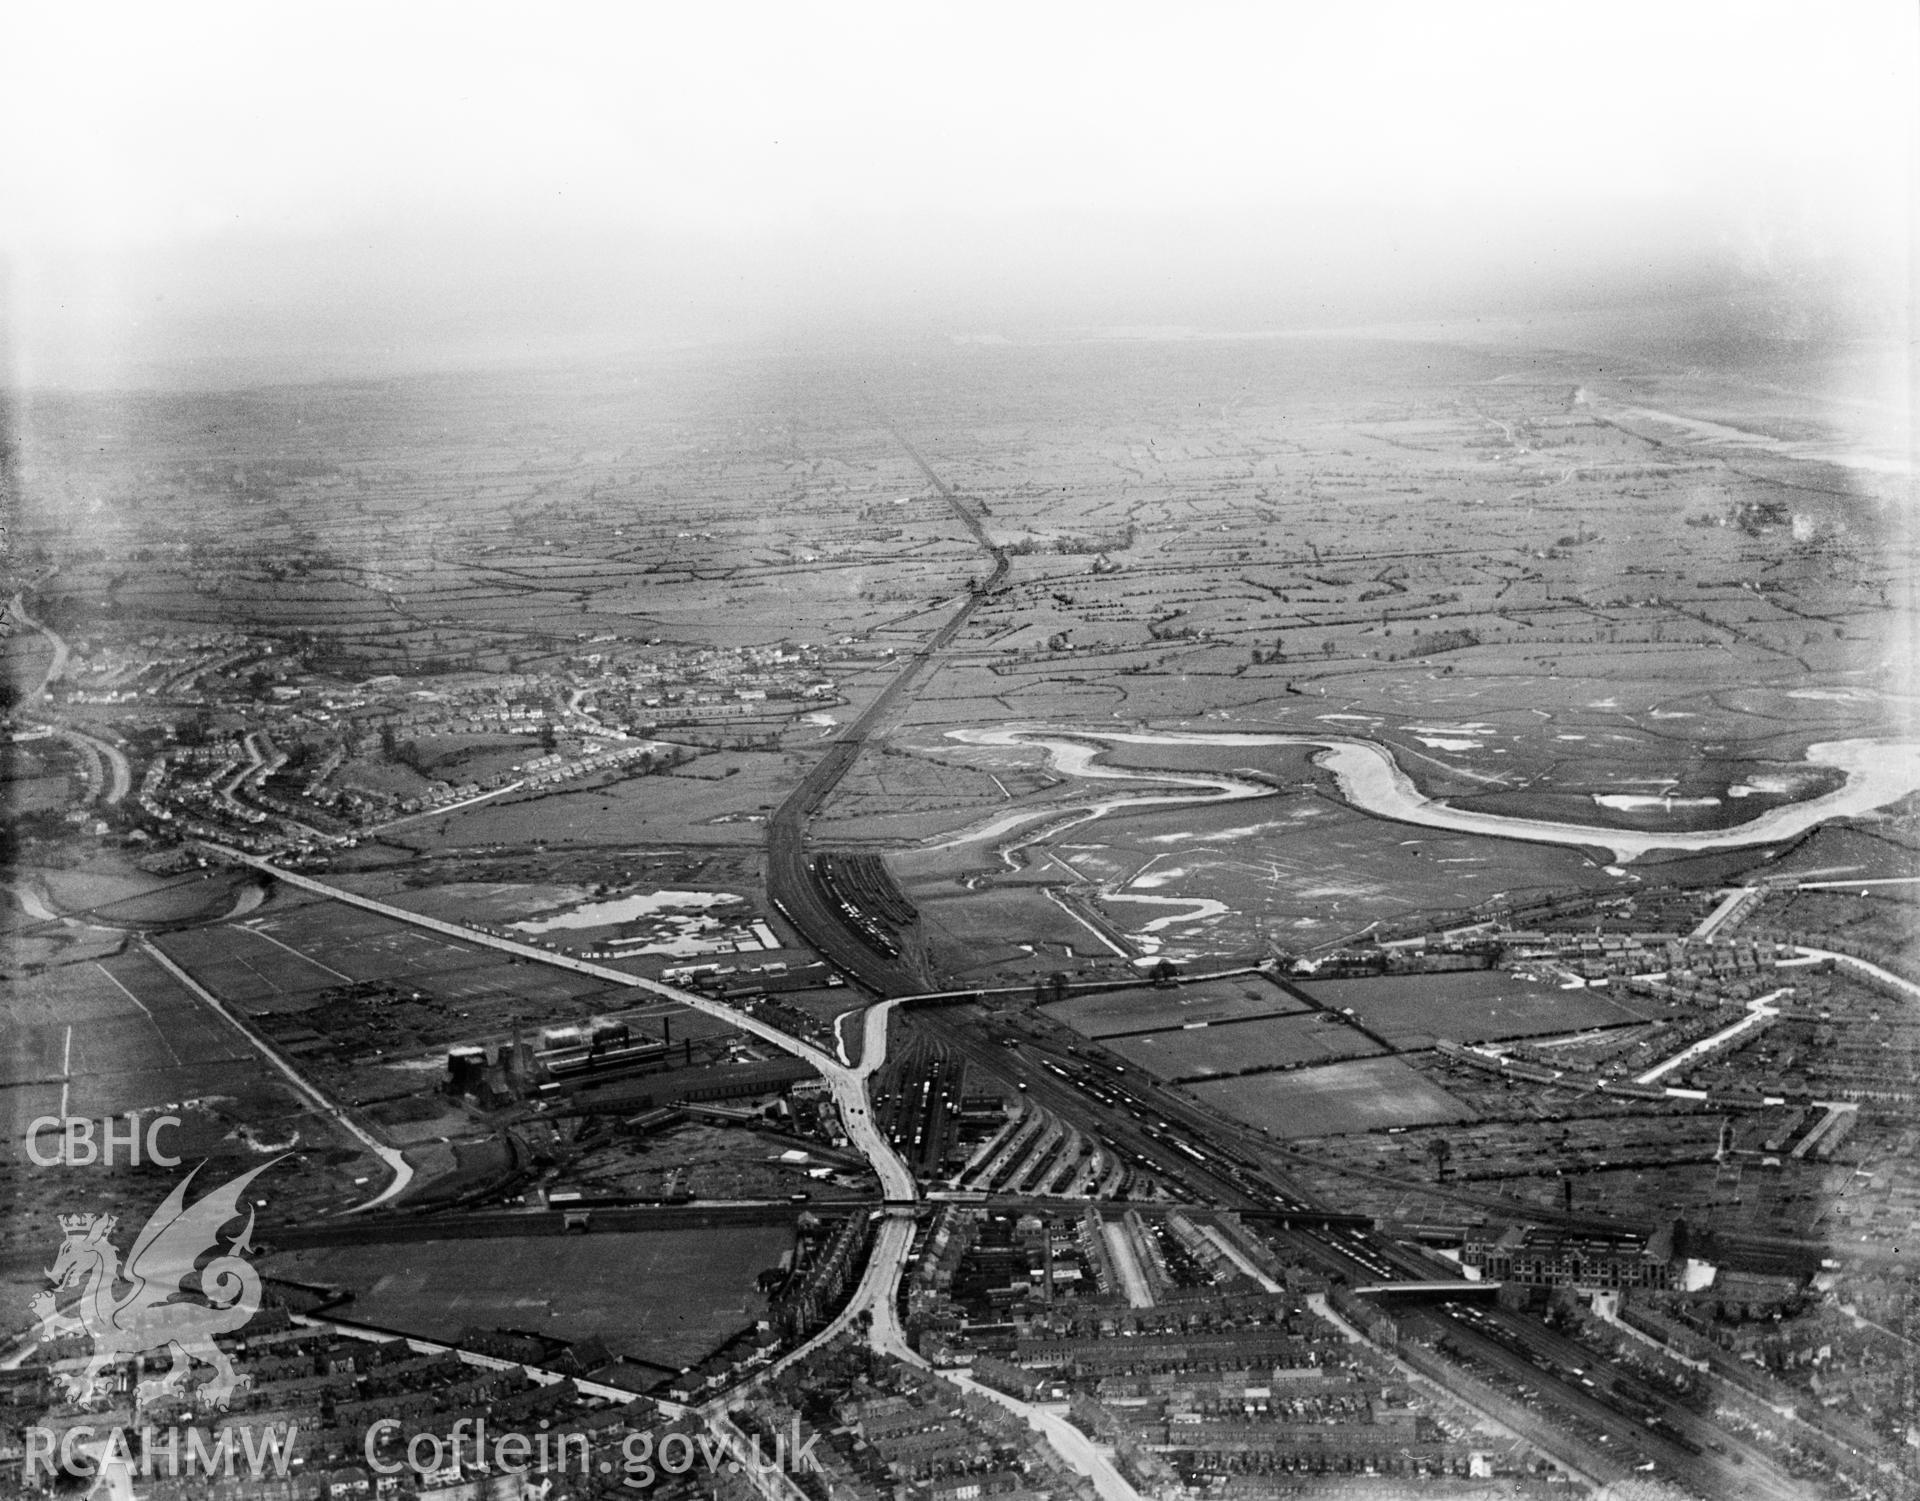 View of Cardiff showing the area near Rumney and Pengam Moor, oblique aerial view. 5?x4? black and white glass plate negative.